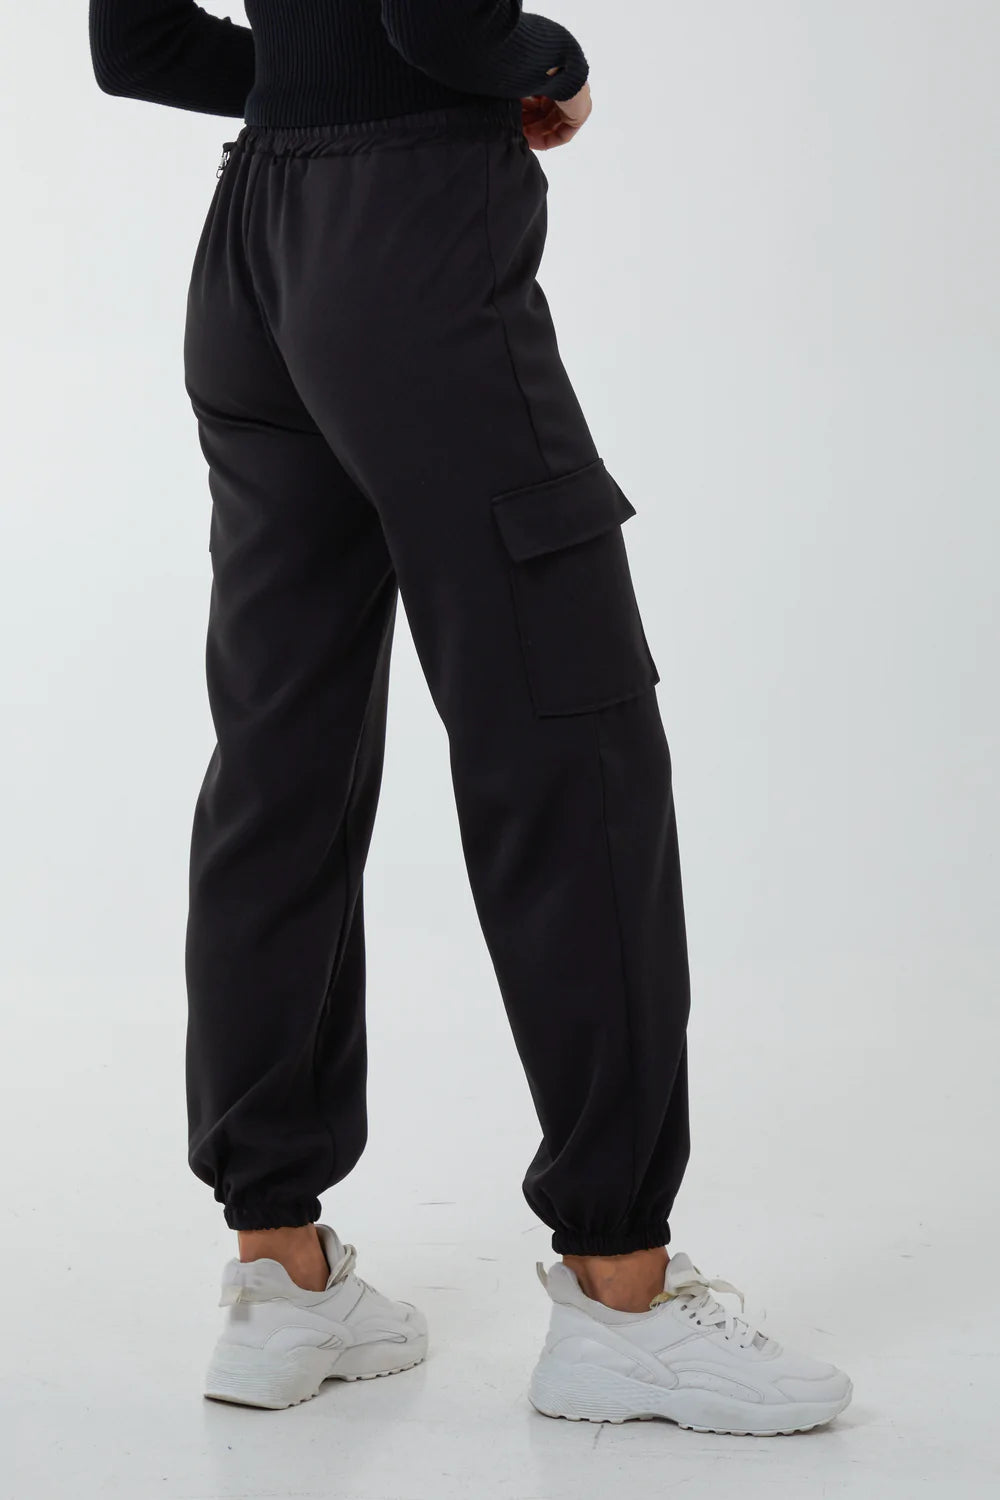 Black cargo pants with removable chain and side pockets